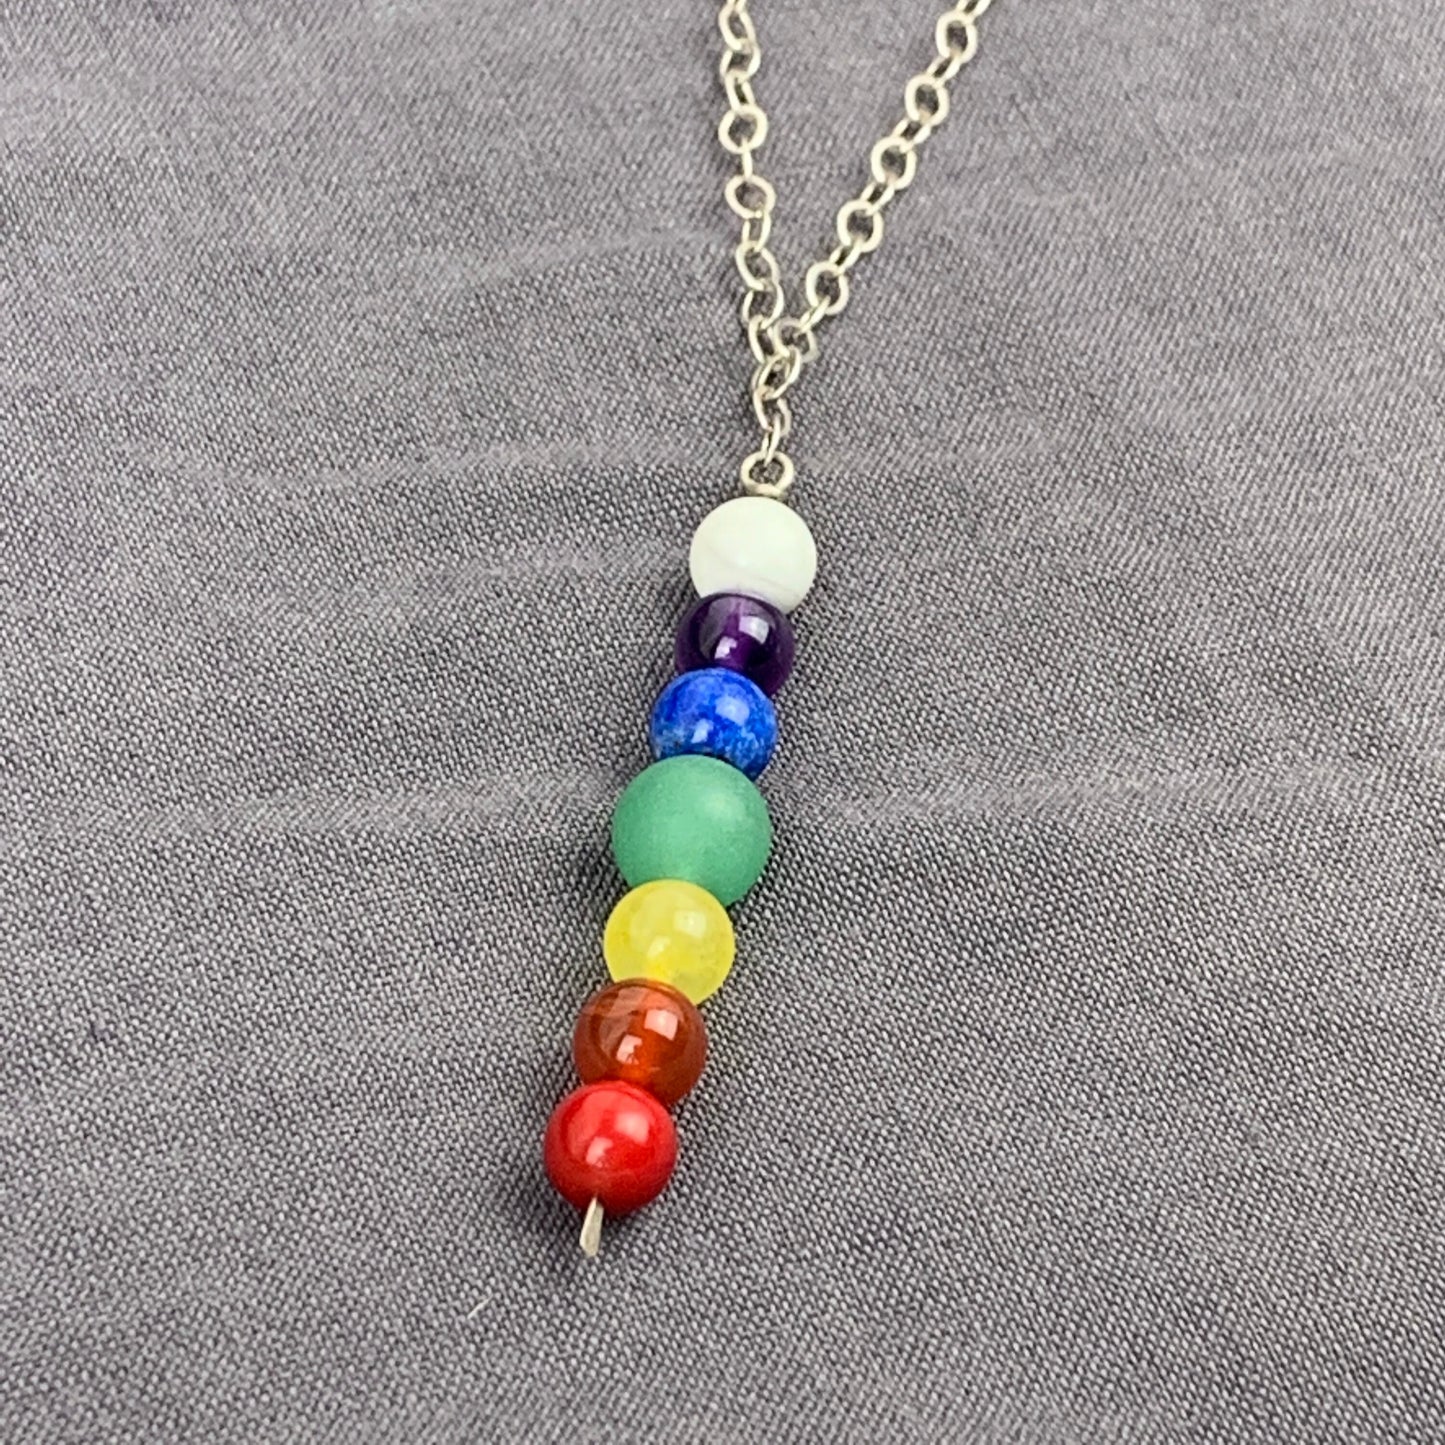 Chakra necklace - gemstone beads - lariat style - silver chain - pride jewelry - chakra/rainbow colors